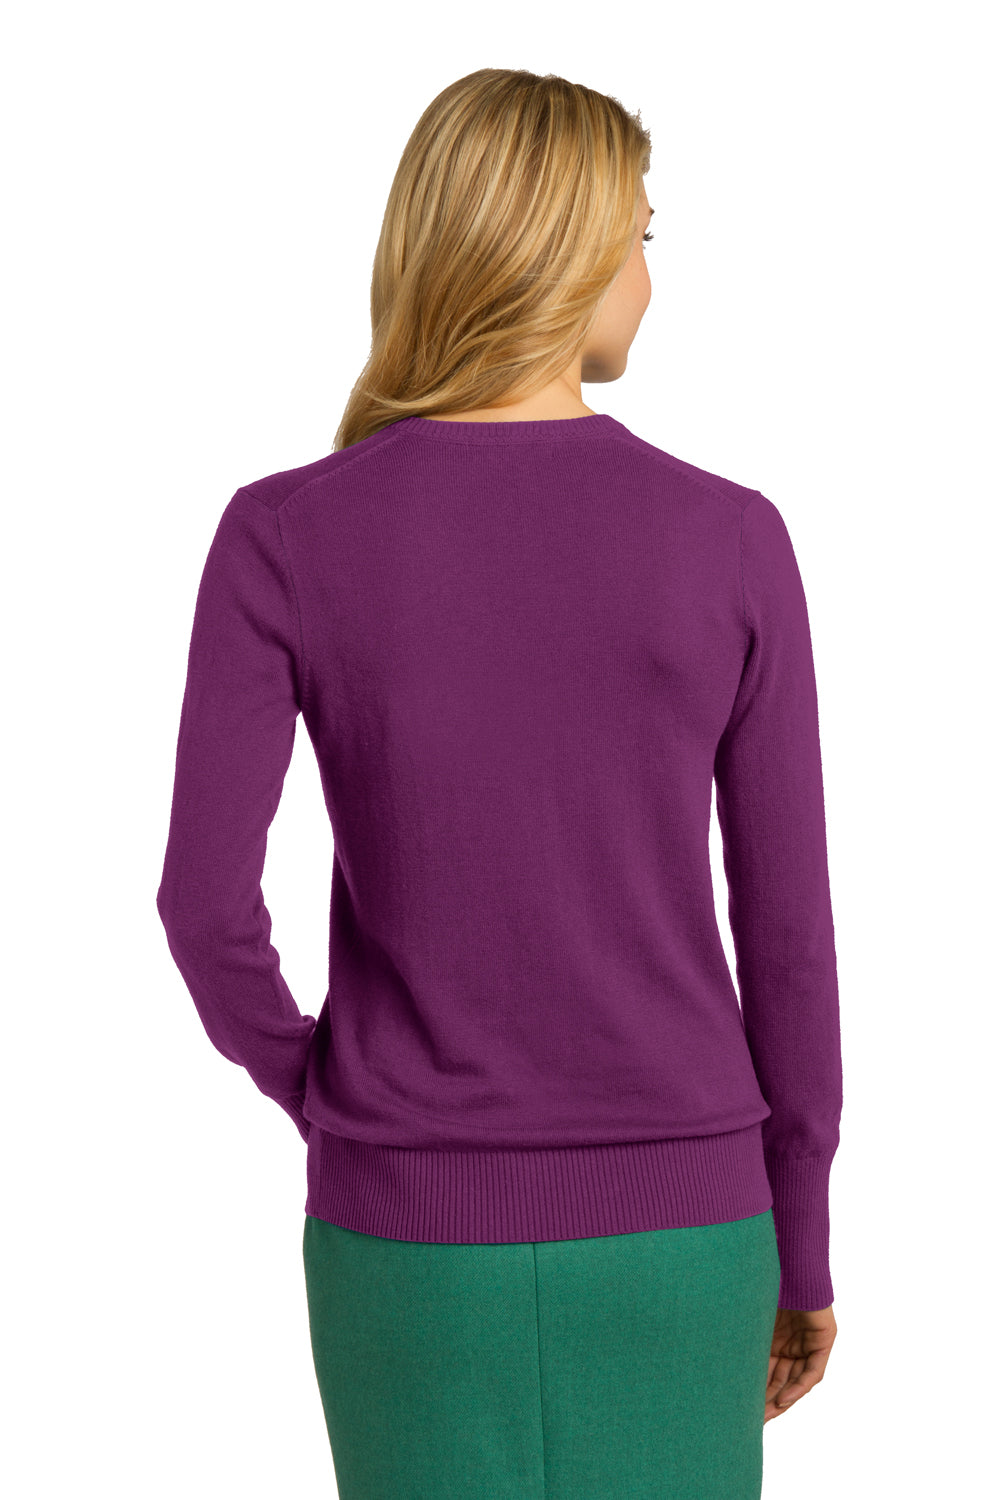 Port Authority LSW285 Womens Long Sleeve V-Neck Sweater Berry Purple Back